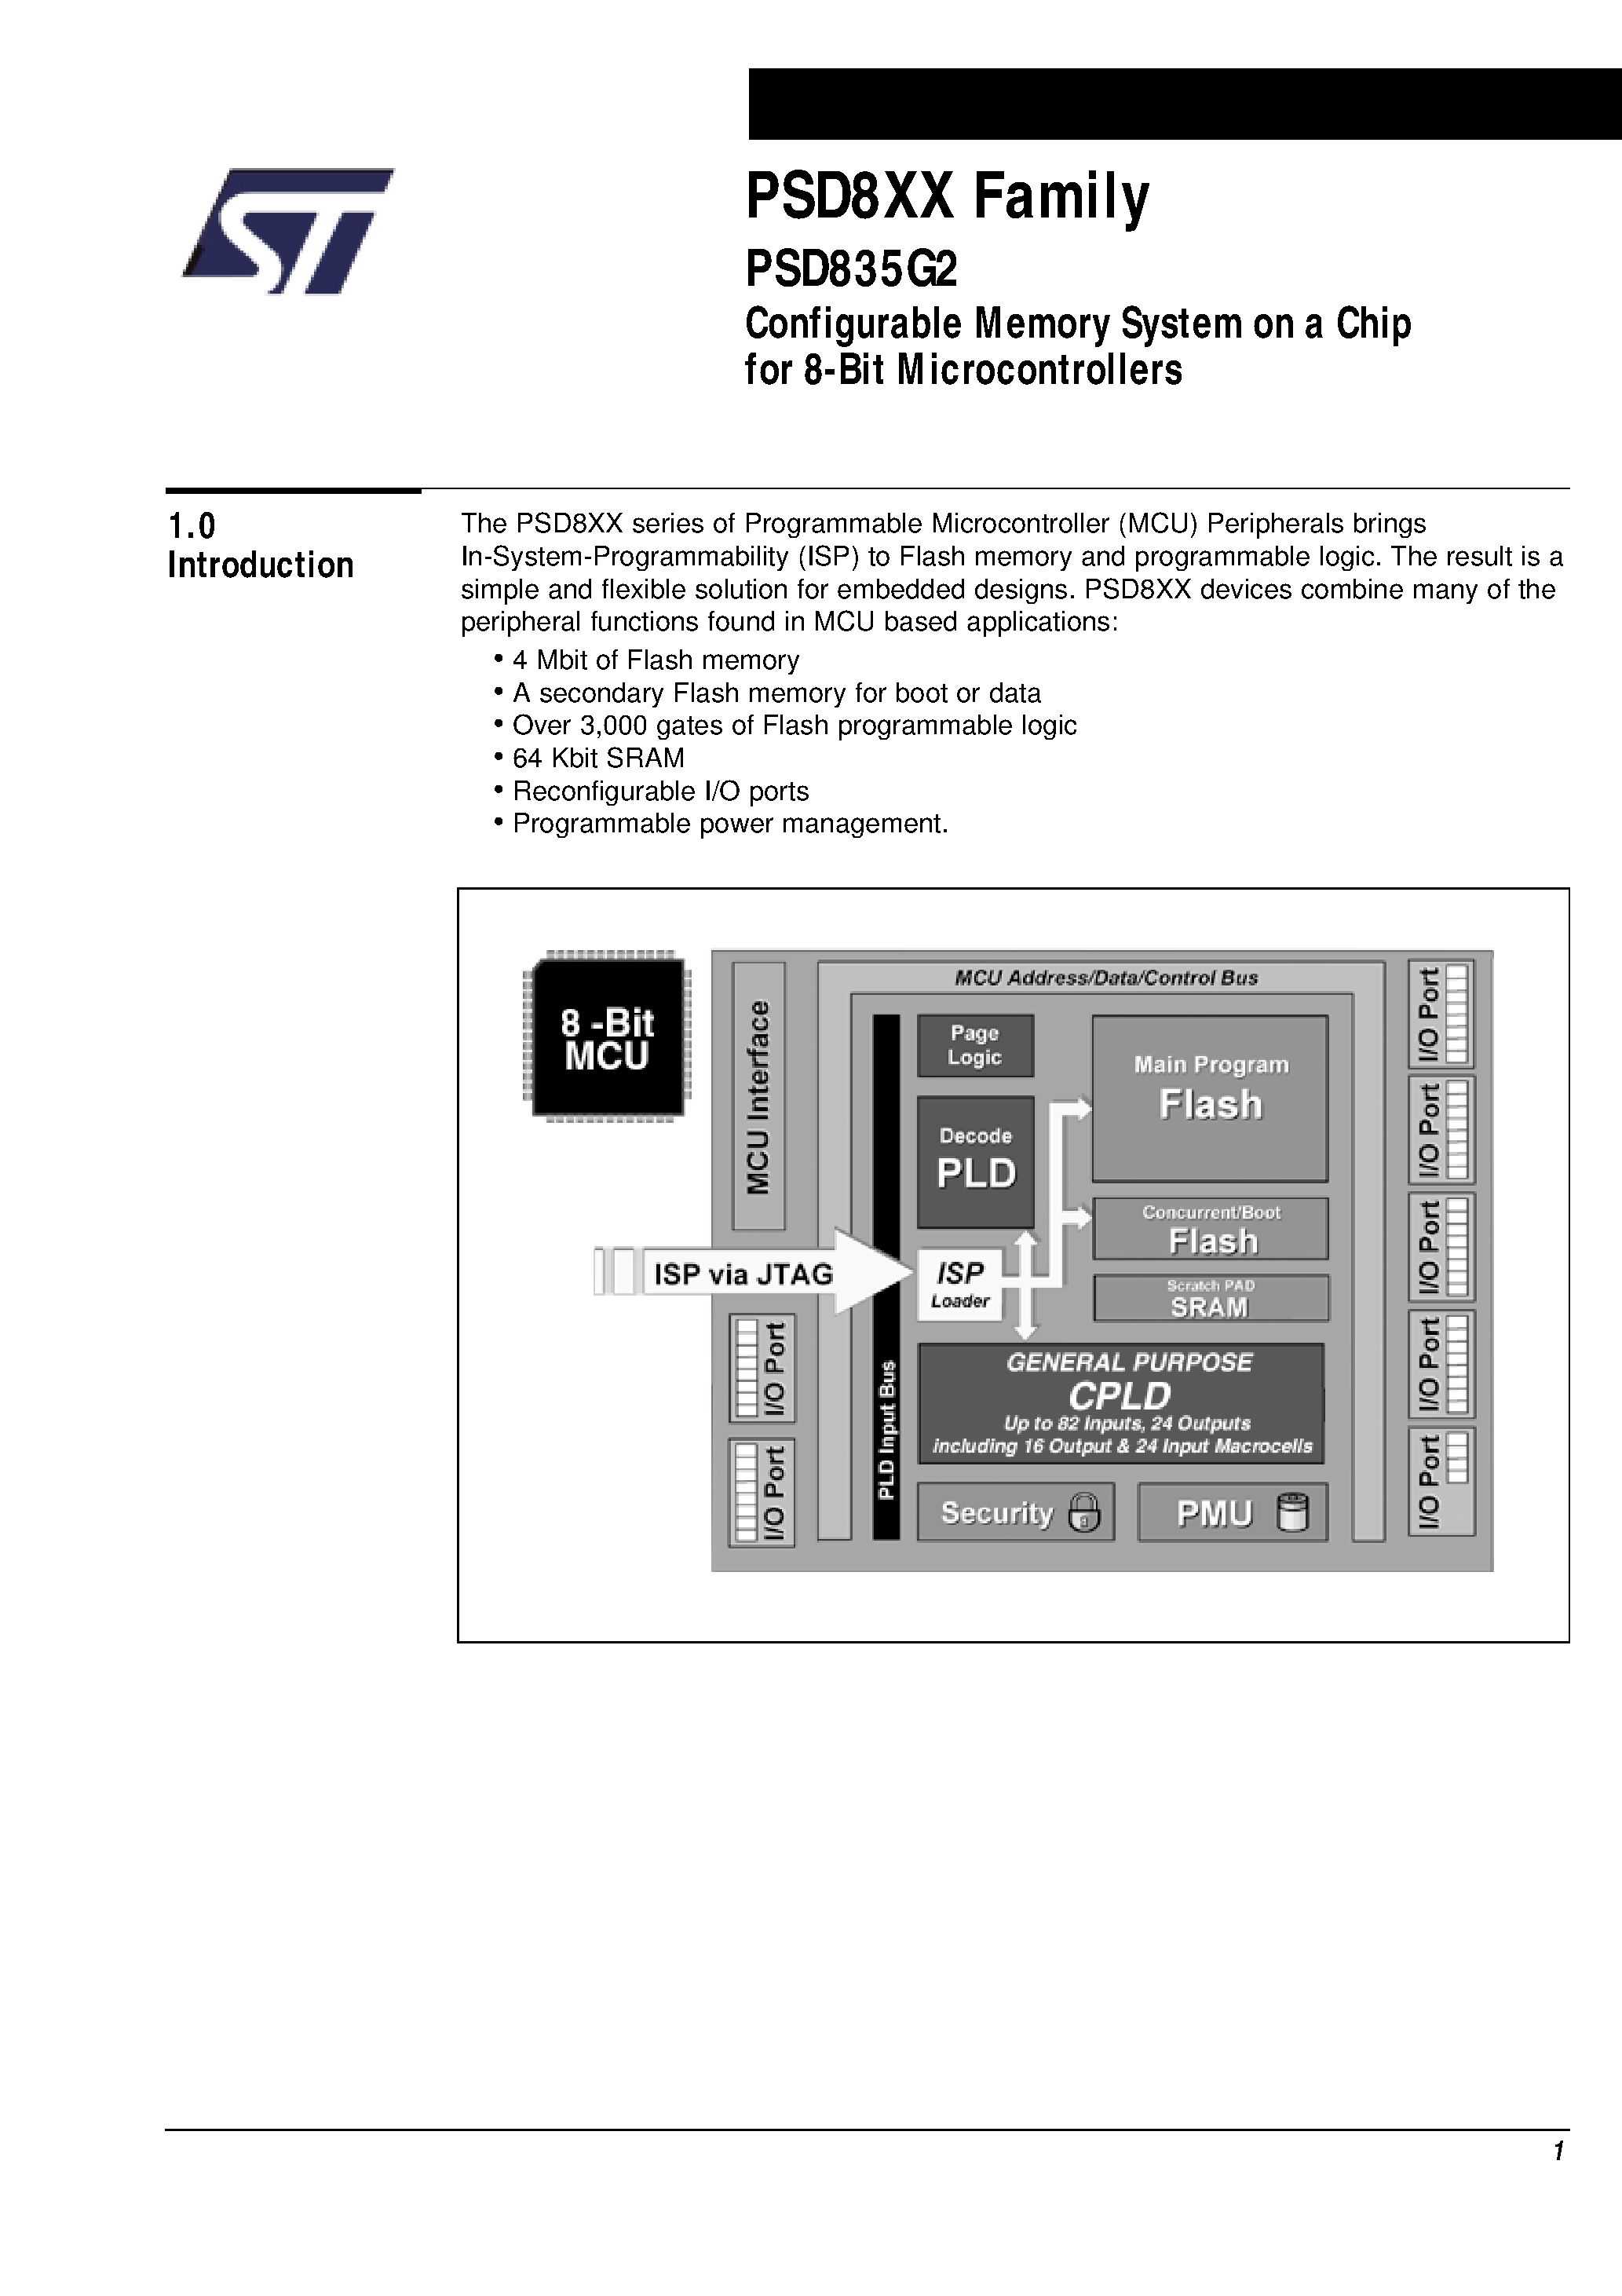 Datasheet PSD835F1-A-15MI - Configurable Memory System on a Chip for 8-Bit Microcontrollers page 2